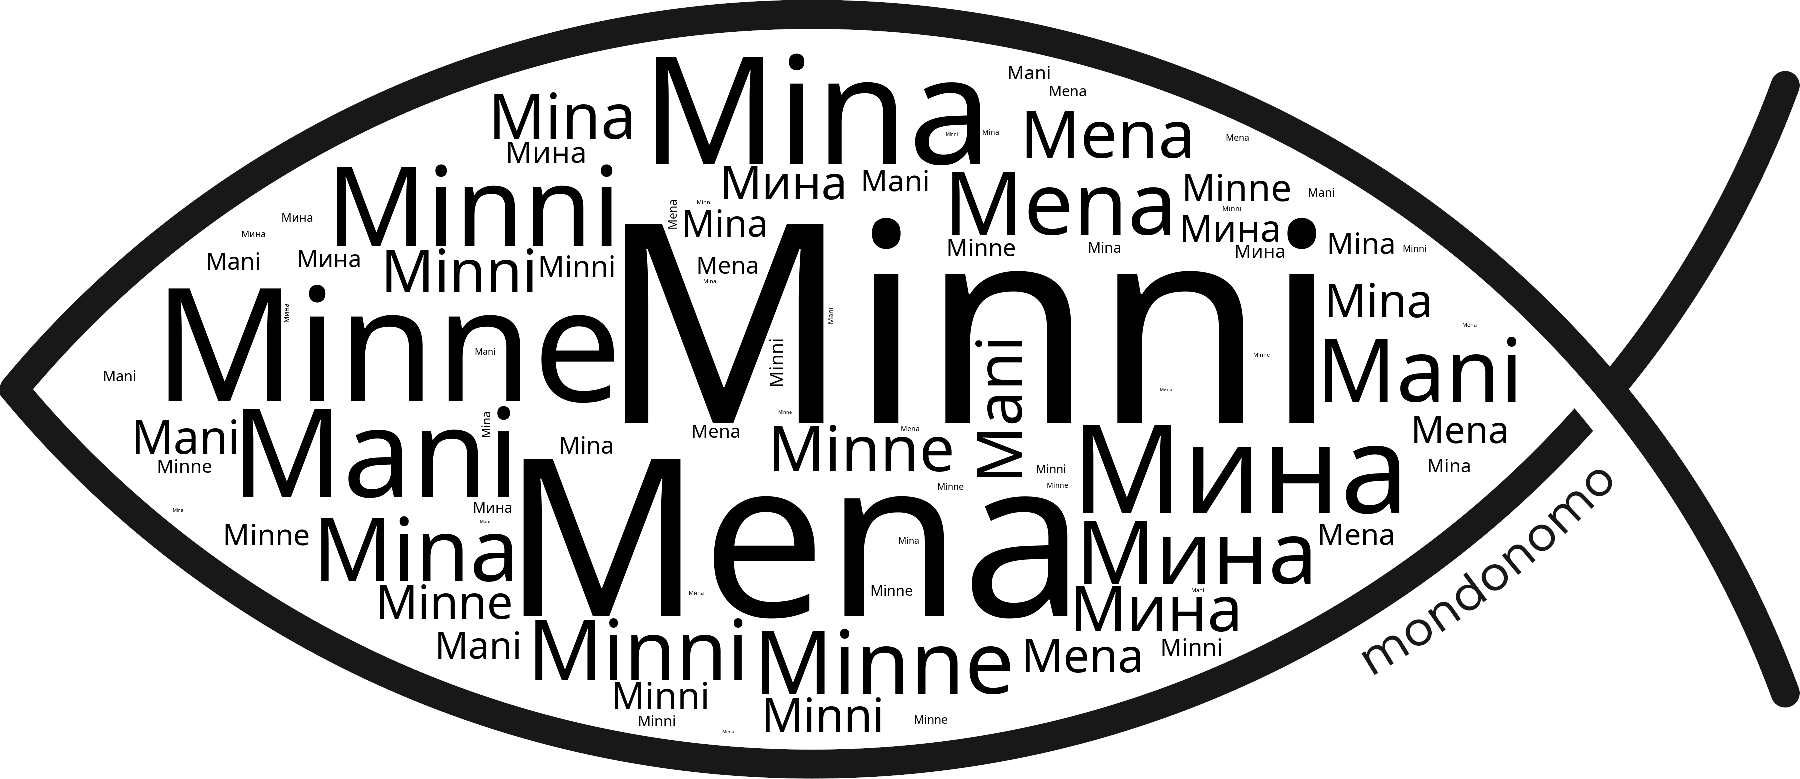 Name Minni in the world's Bibles